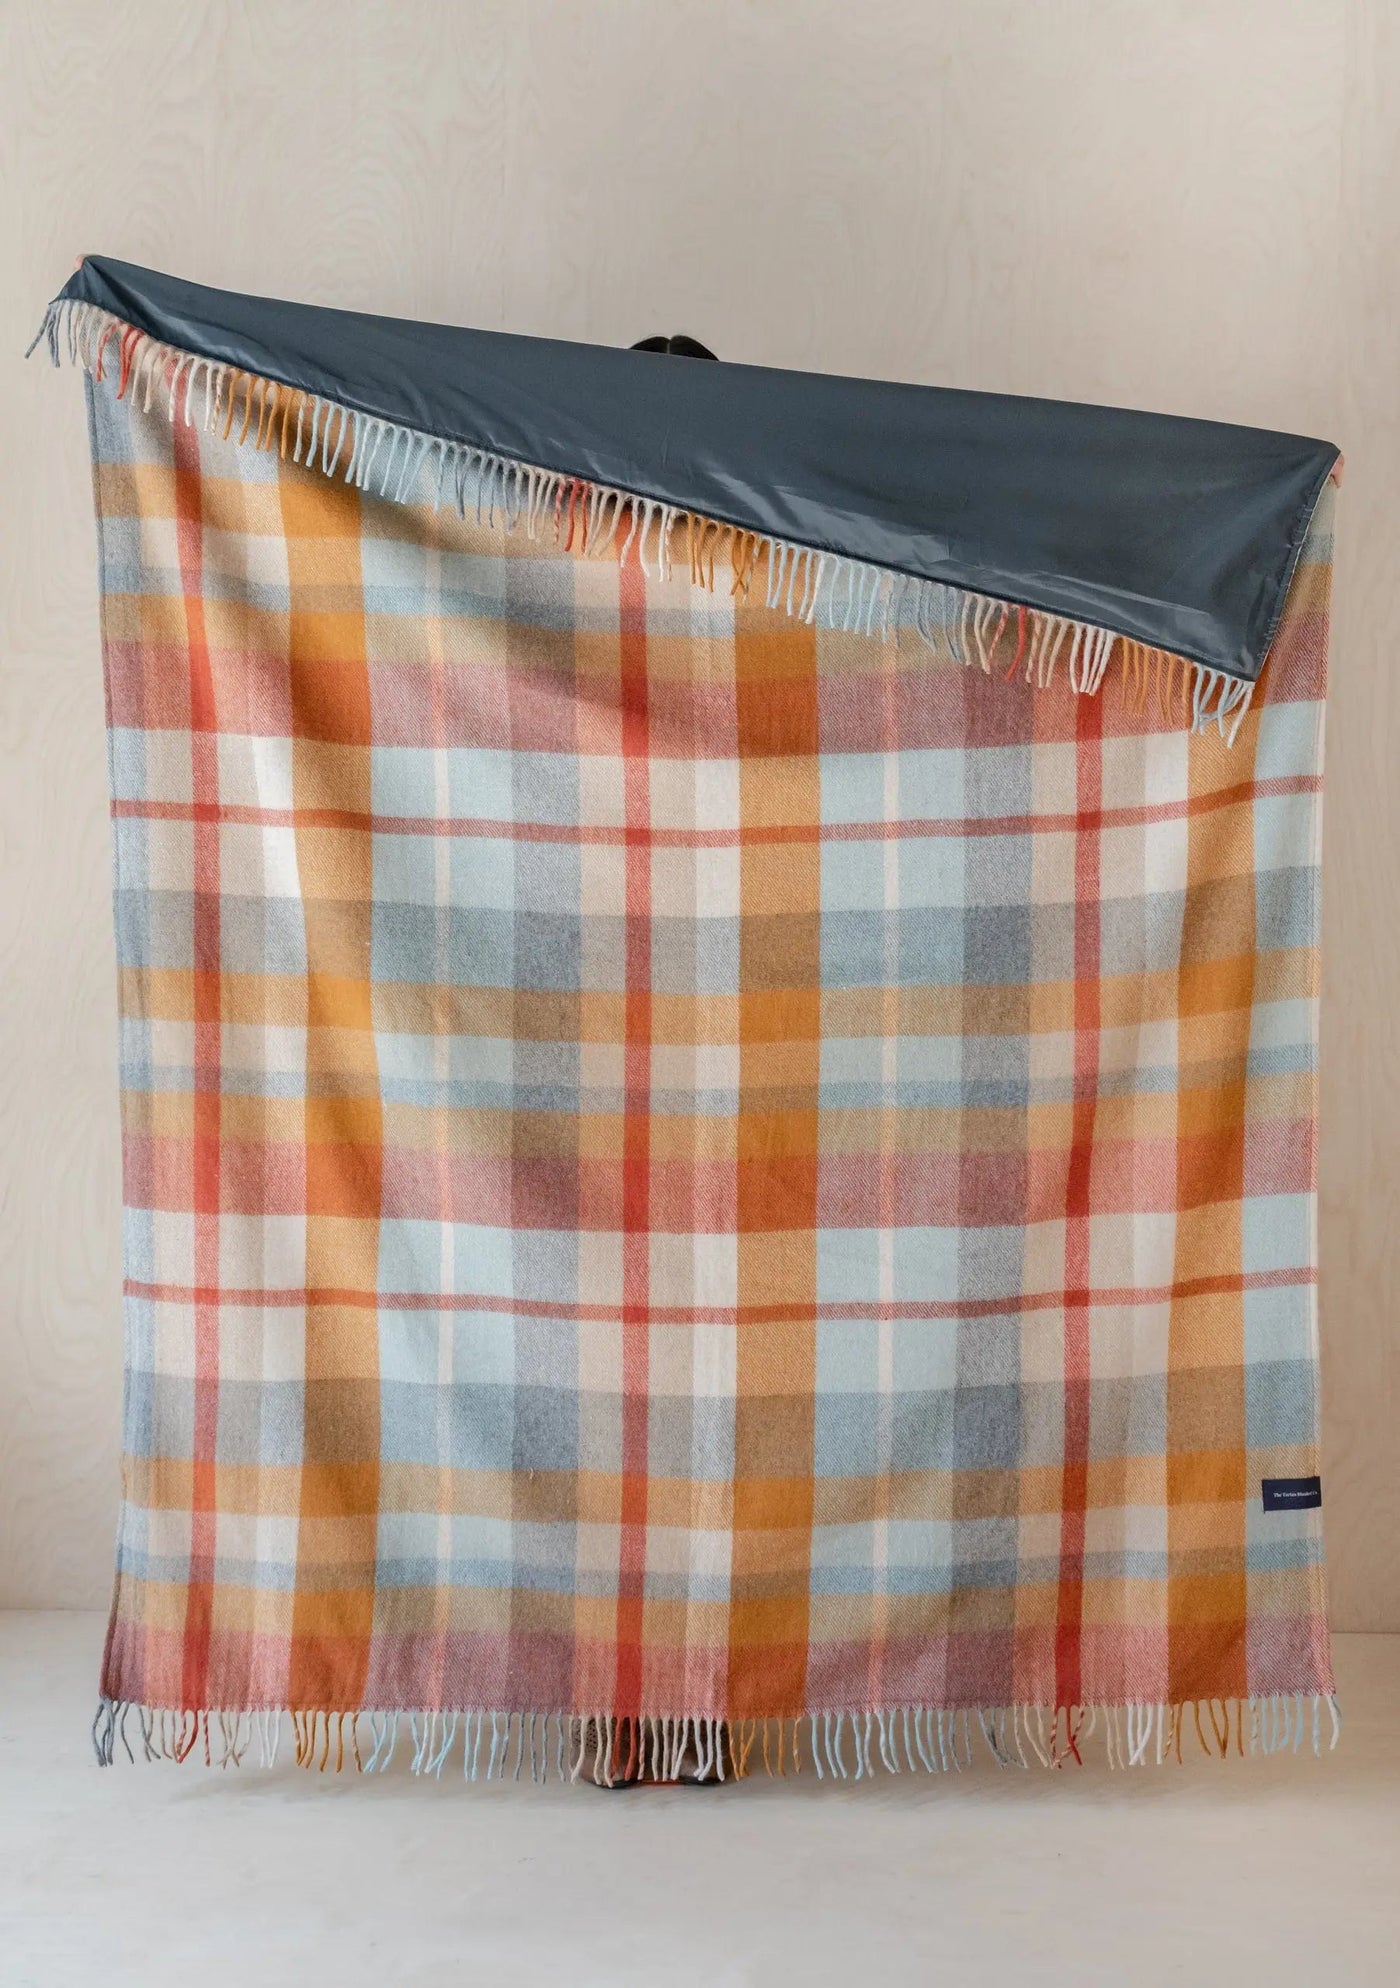 Waterproof Picnic Blanket with Carrier